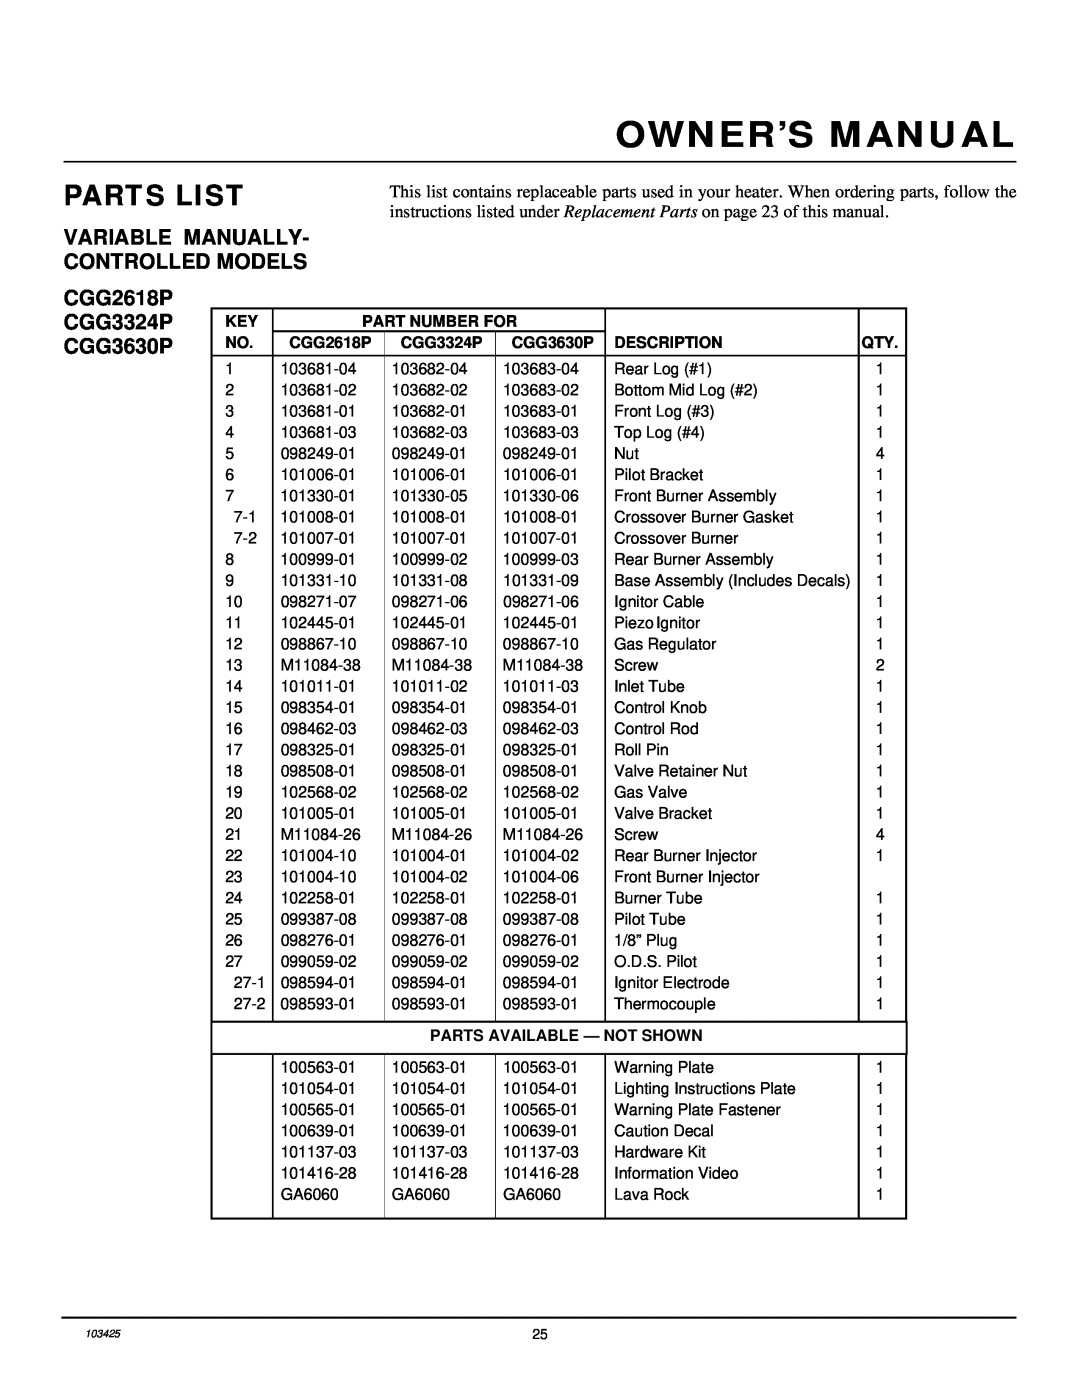 Desa Tech CGG3324PT Parts List, Owner’S Manual, Variable Manually- Controlled Models, CGG2618P CGG3324P CGG3630P 